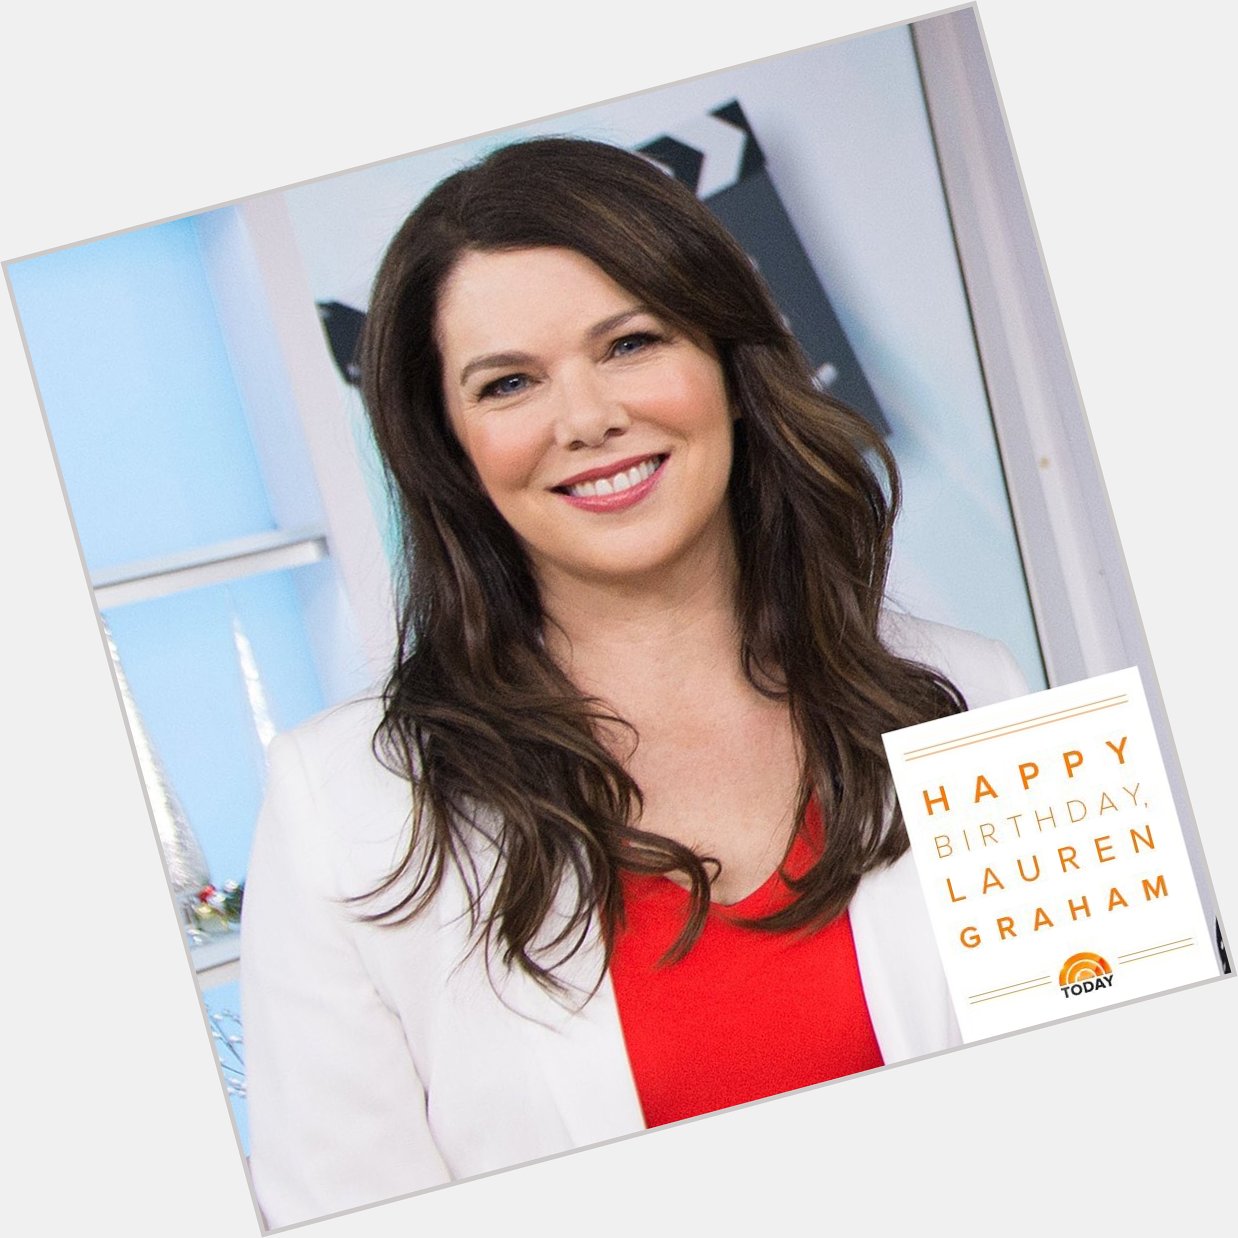 Happy 50th Birthday to my favorite tv Mom ever, the beautiful and talented Lauren Graham!  